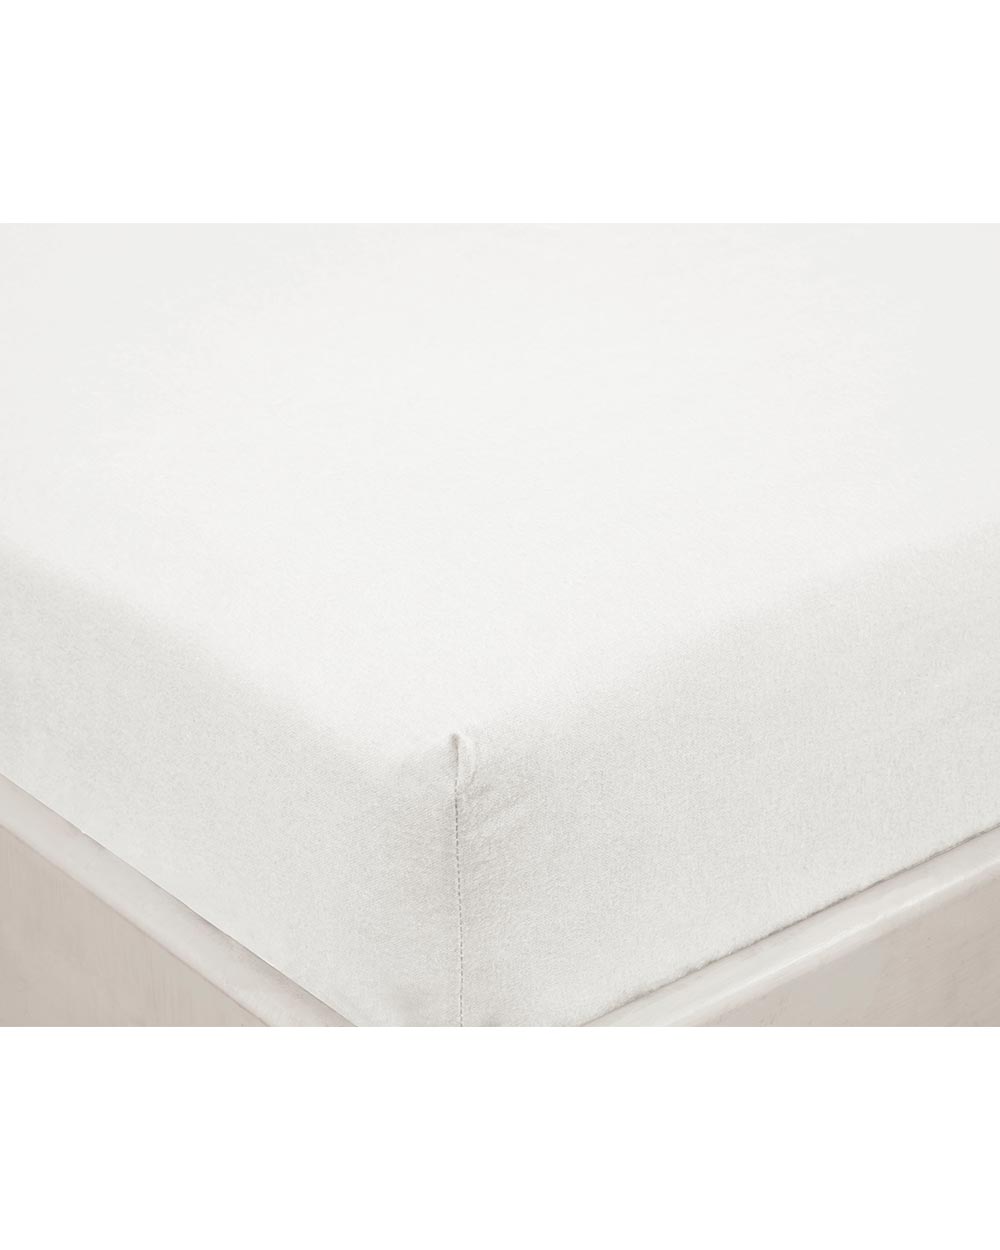 Double Deep Fitted Sheet 100% Bamboo